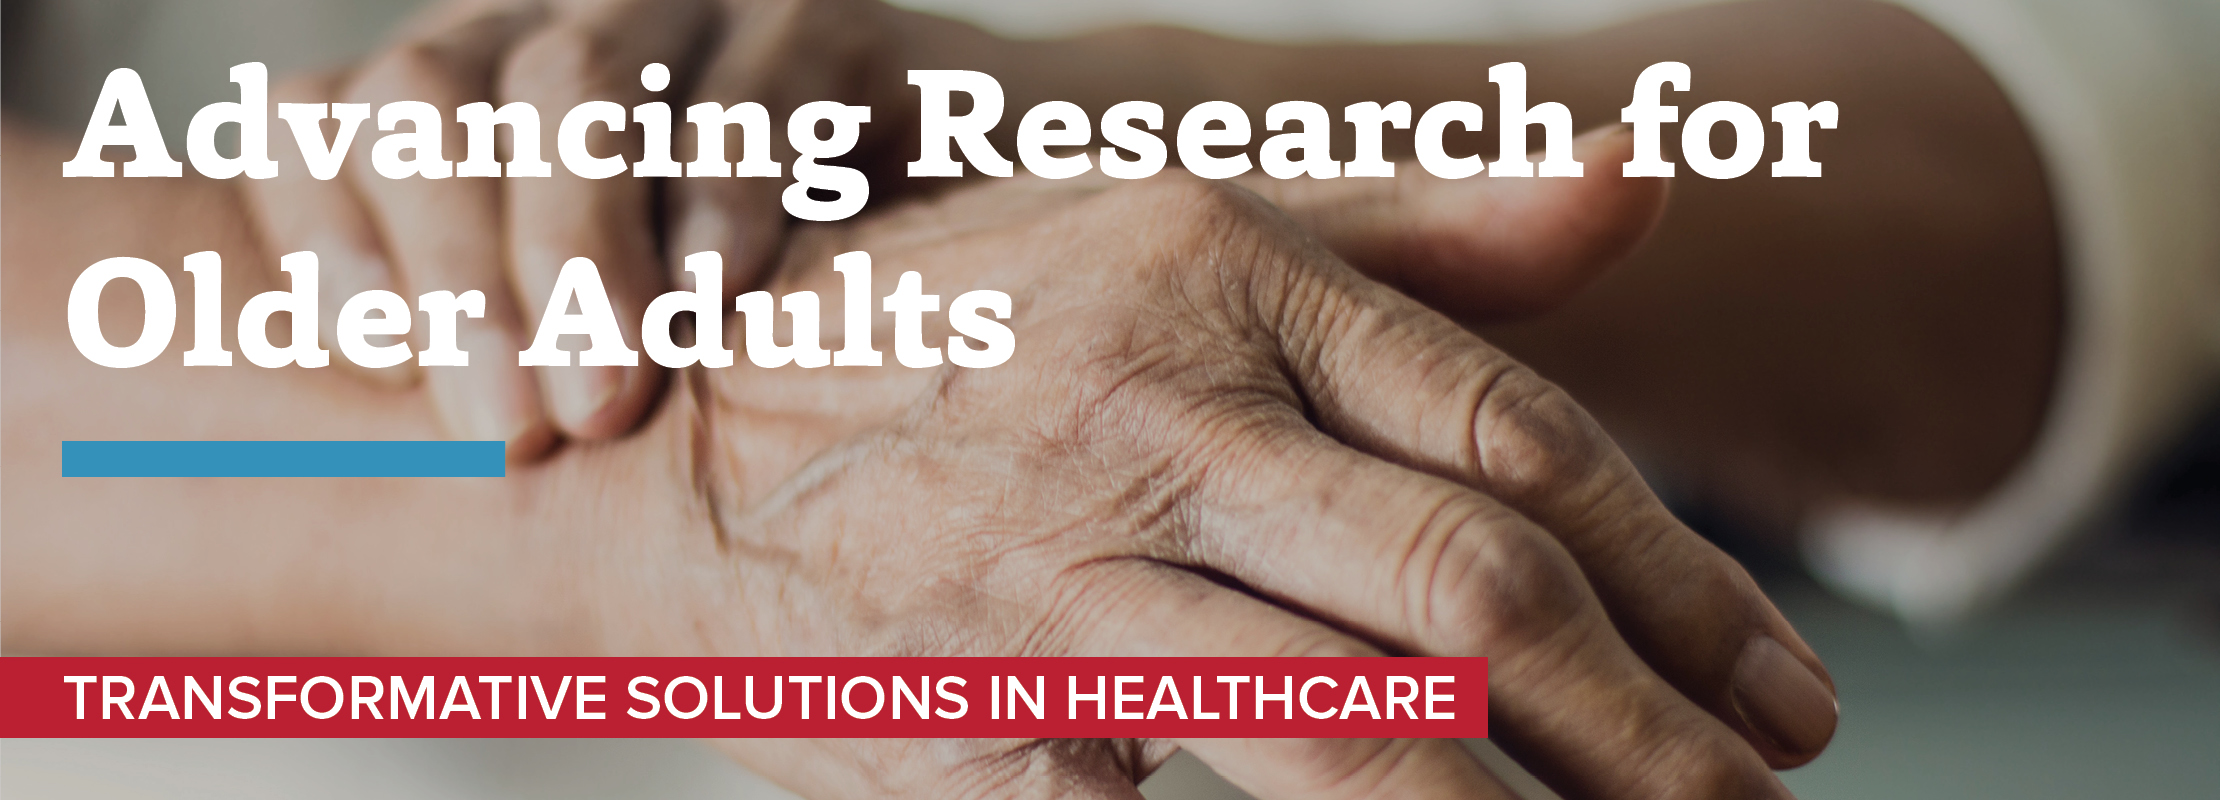 Advancing Research for Older Adults